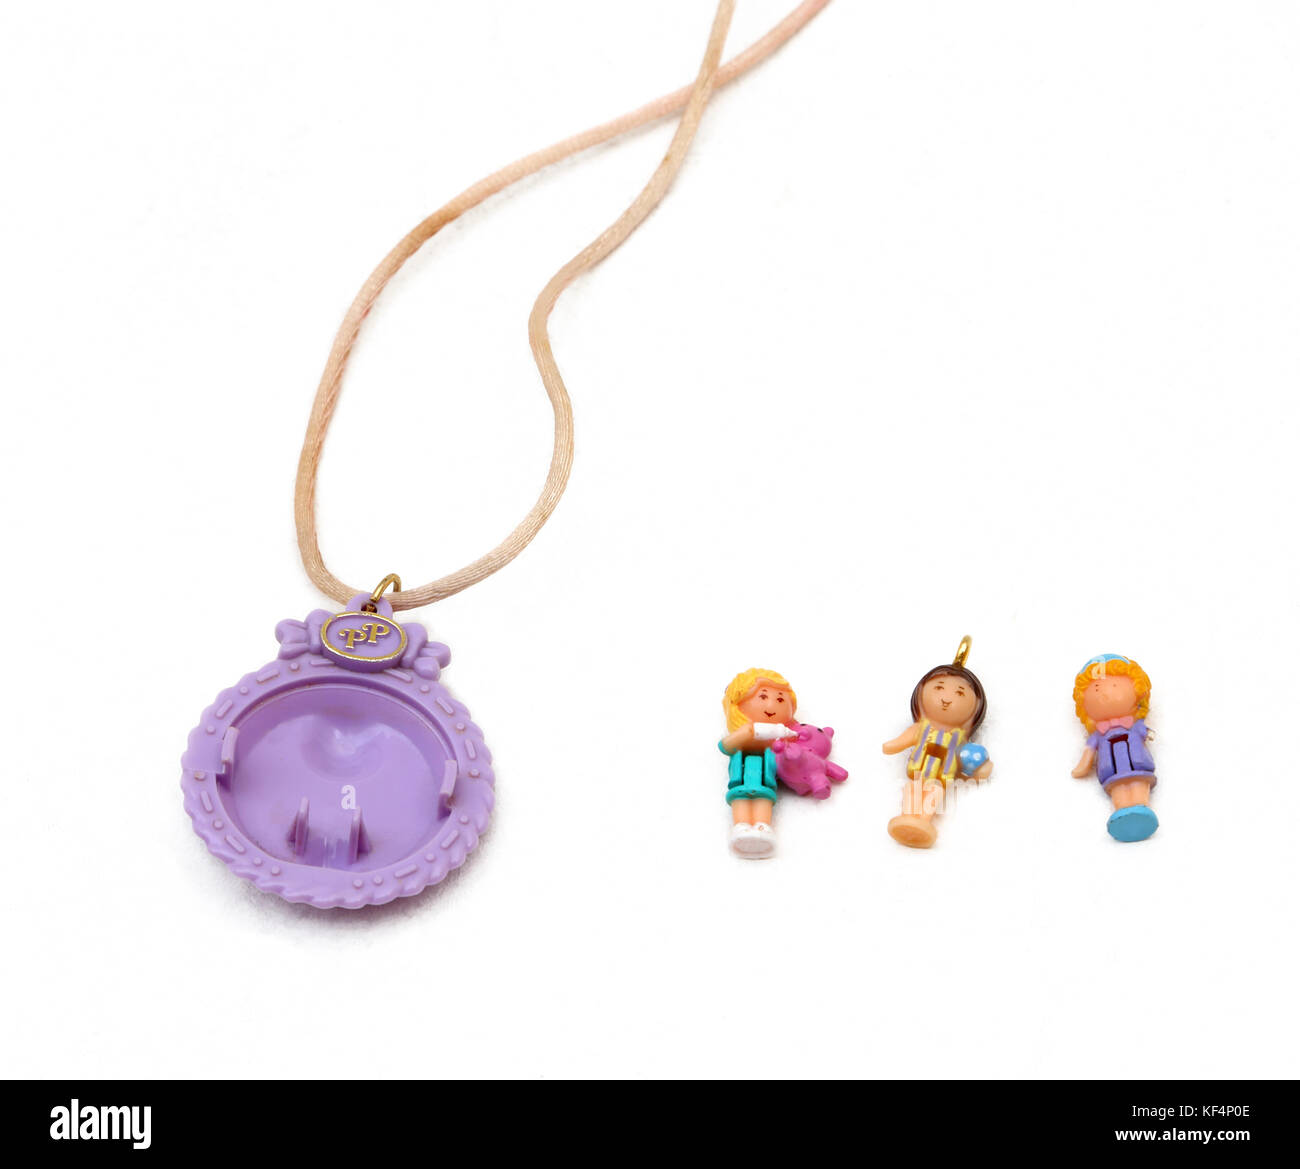 Vintage 1990's Toys Polly Pocket Dolls and necklace Stock Photo